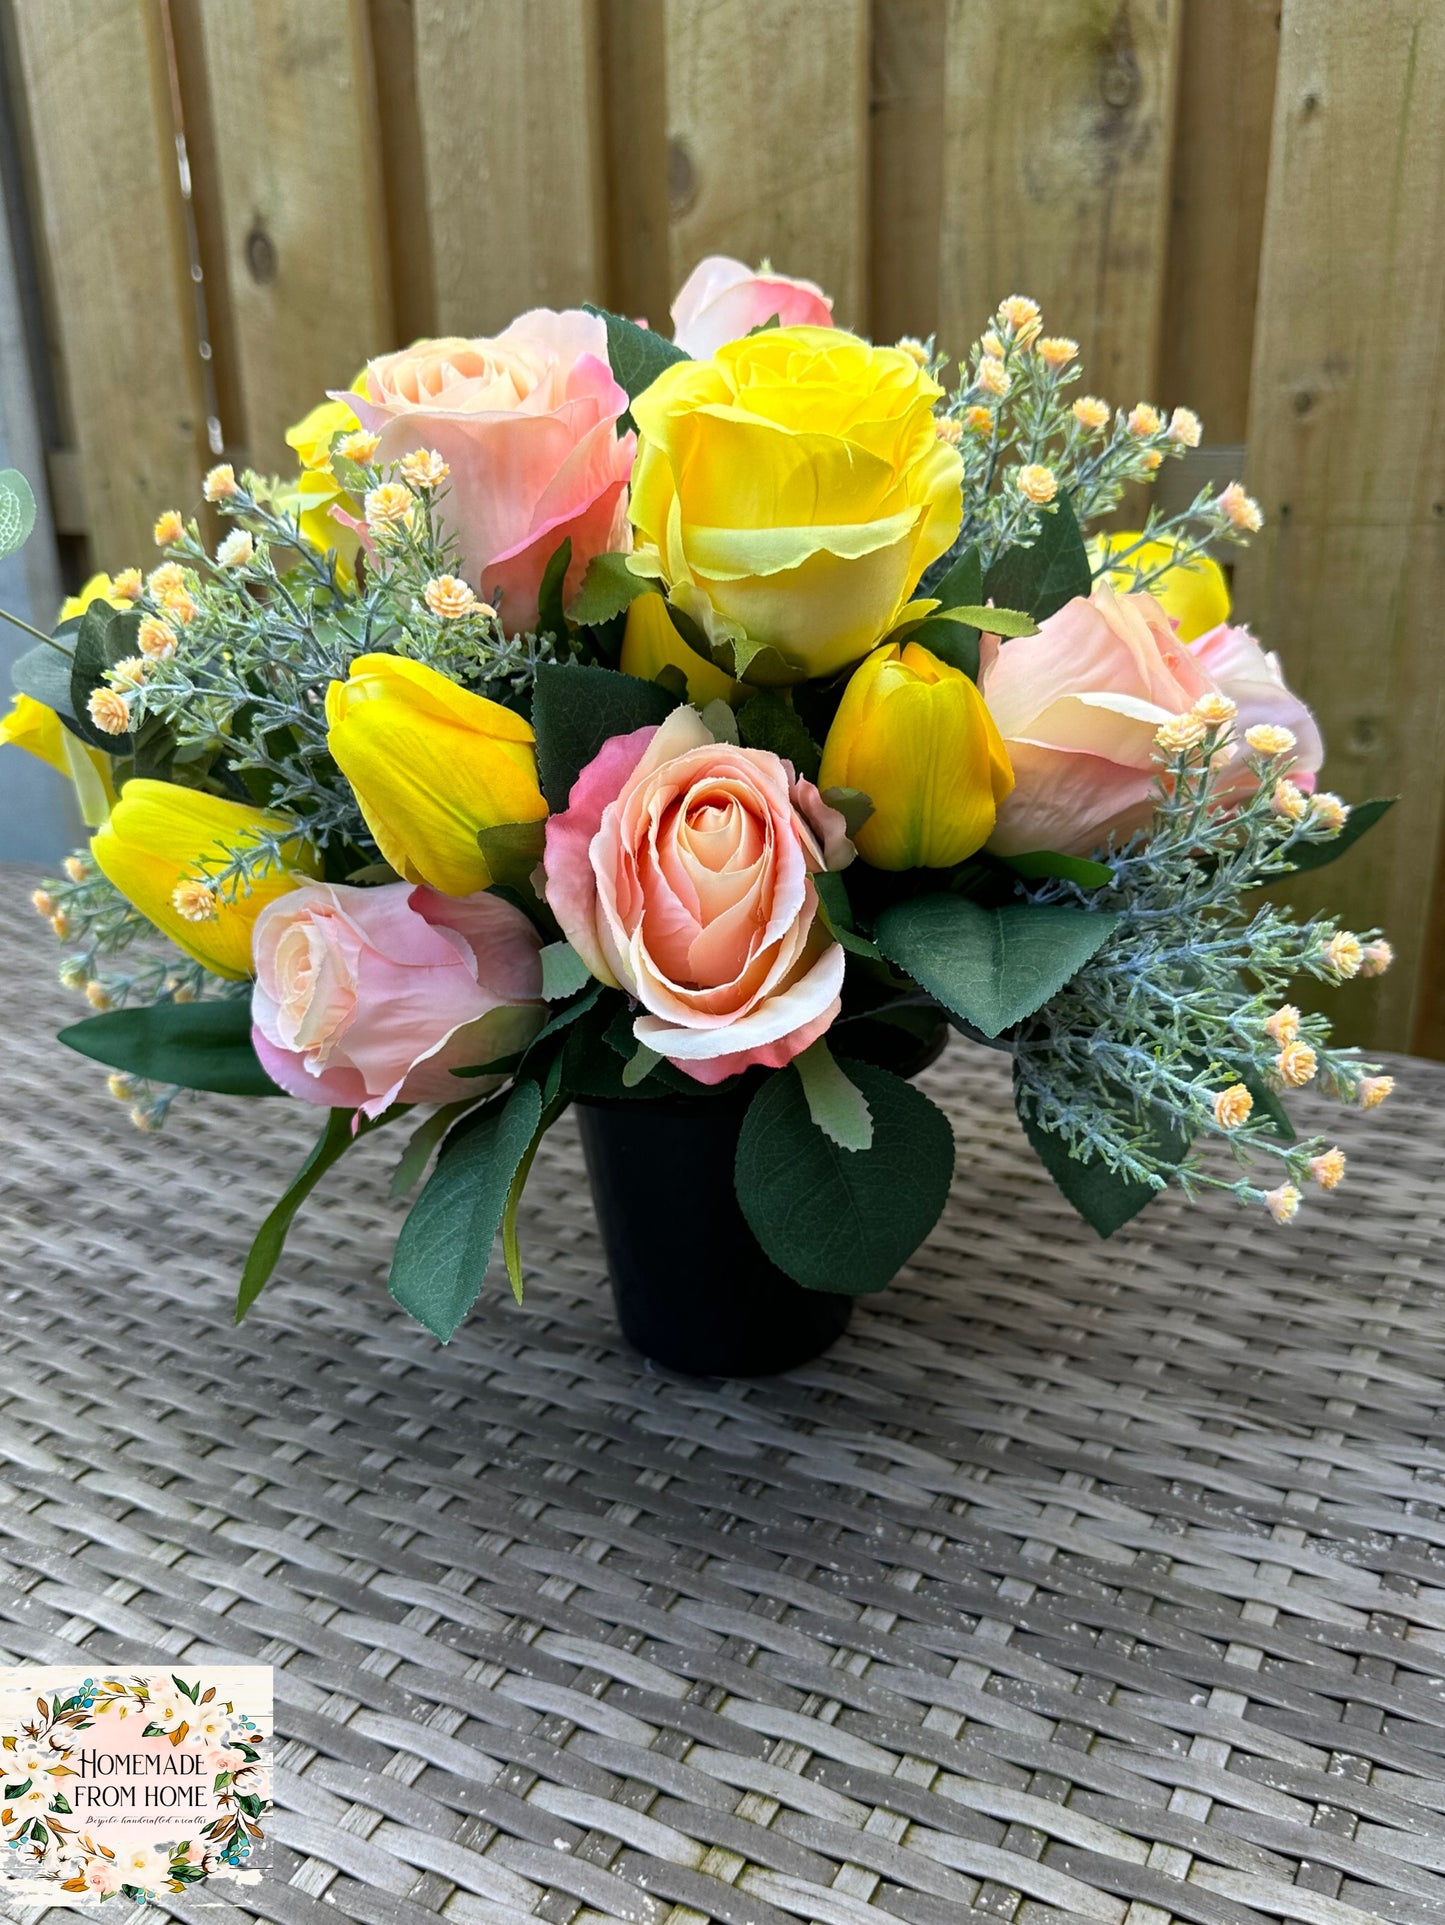 Pink rose and yellow tulip cemetery pot